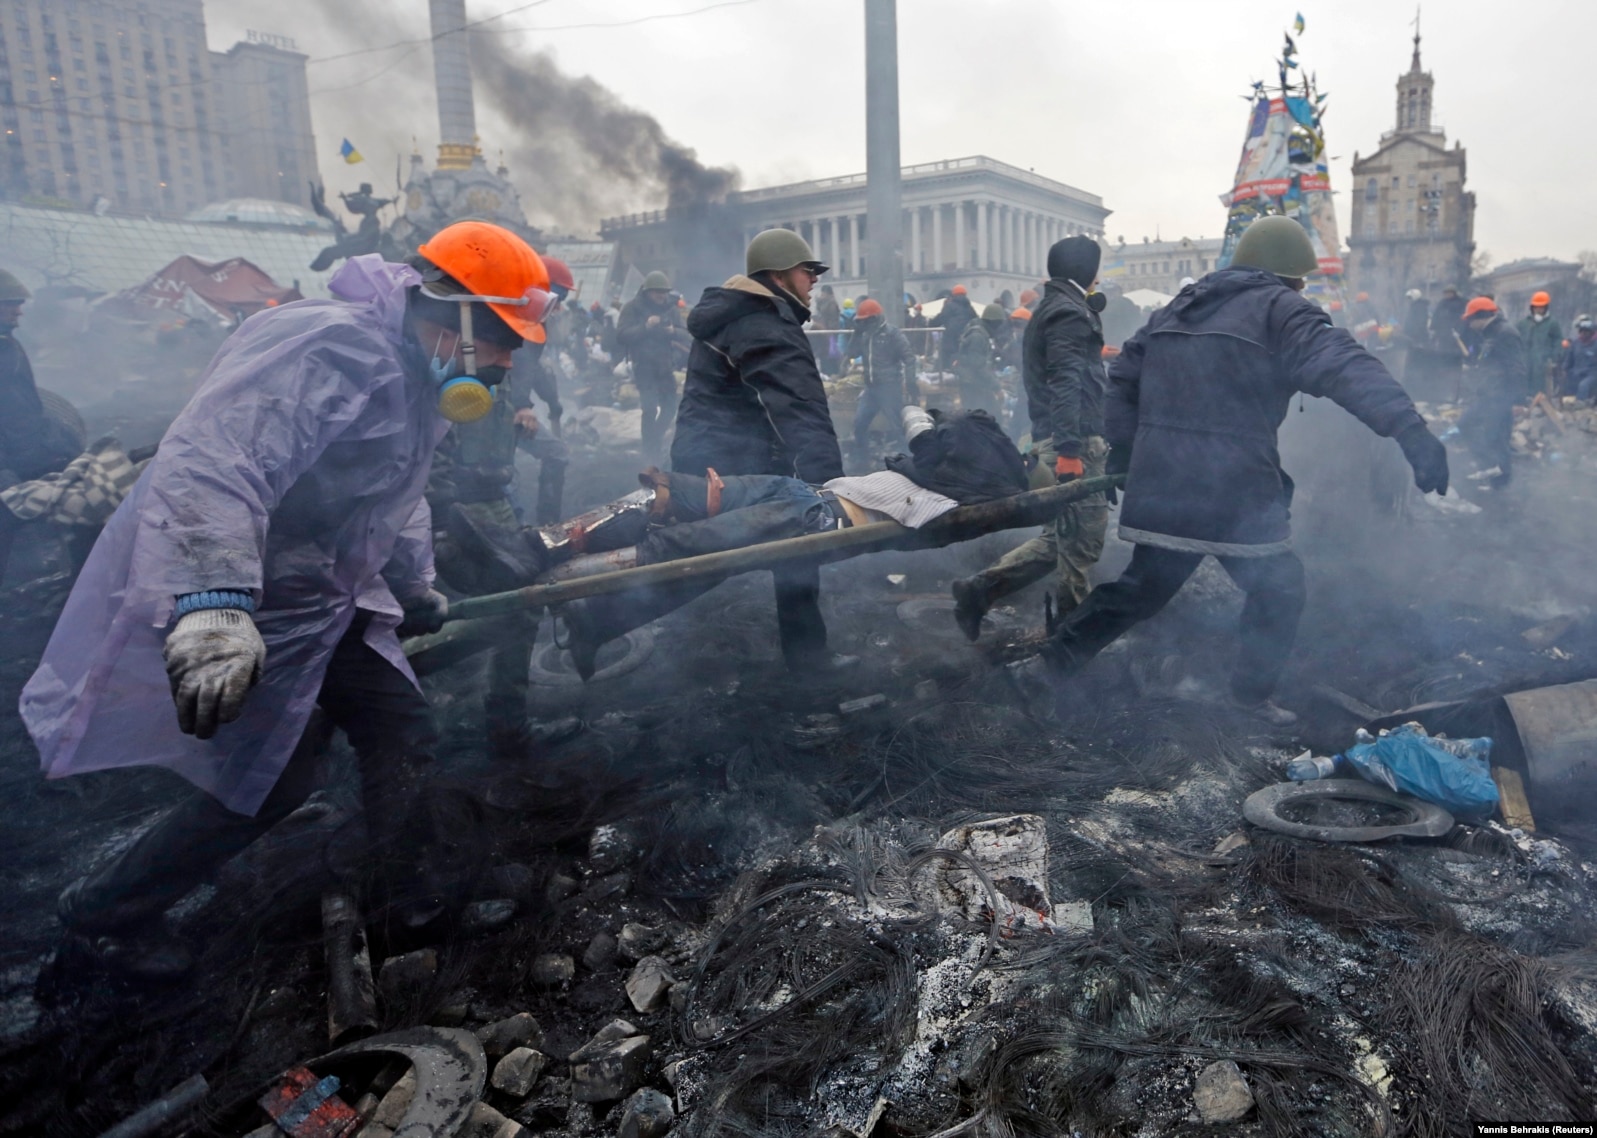 Antigovernment protesters carry an injured man on a stretcher after clashes with riot police on Independence Square in Kyiv on February 20, 2014.